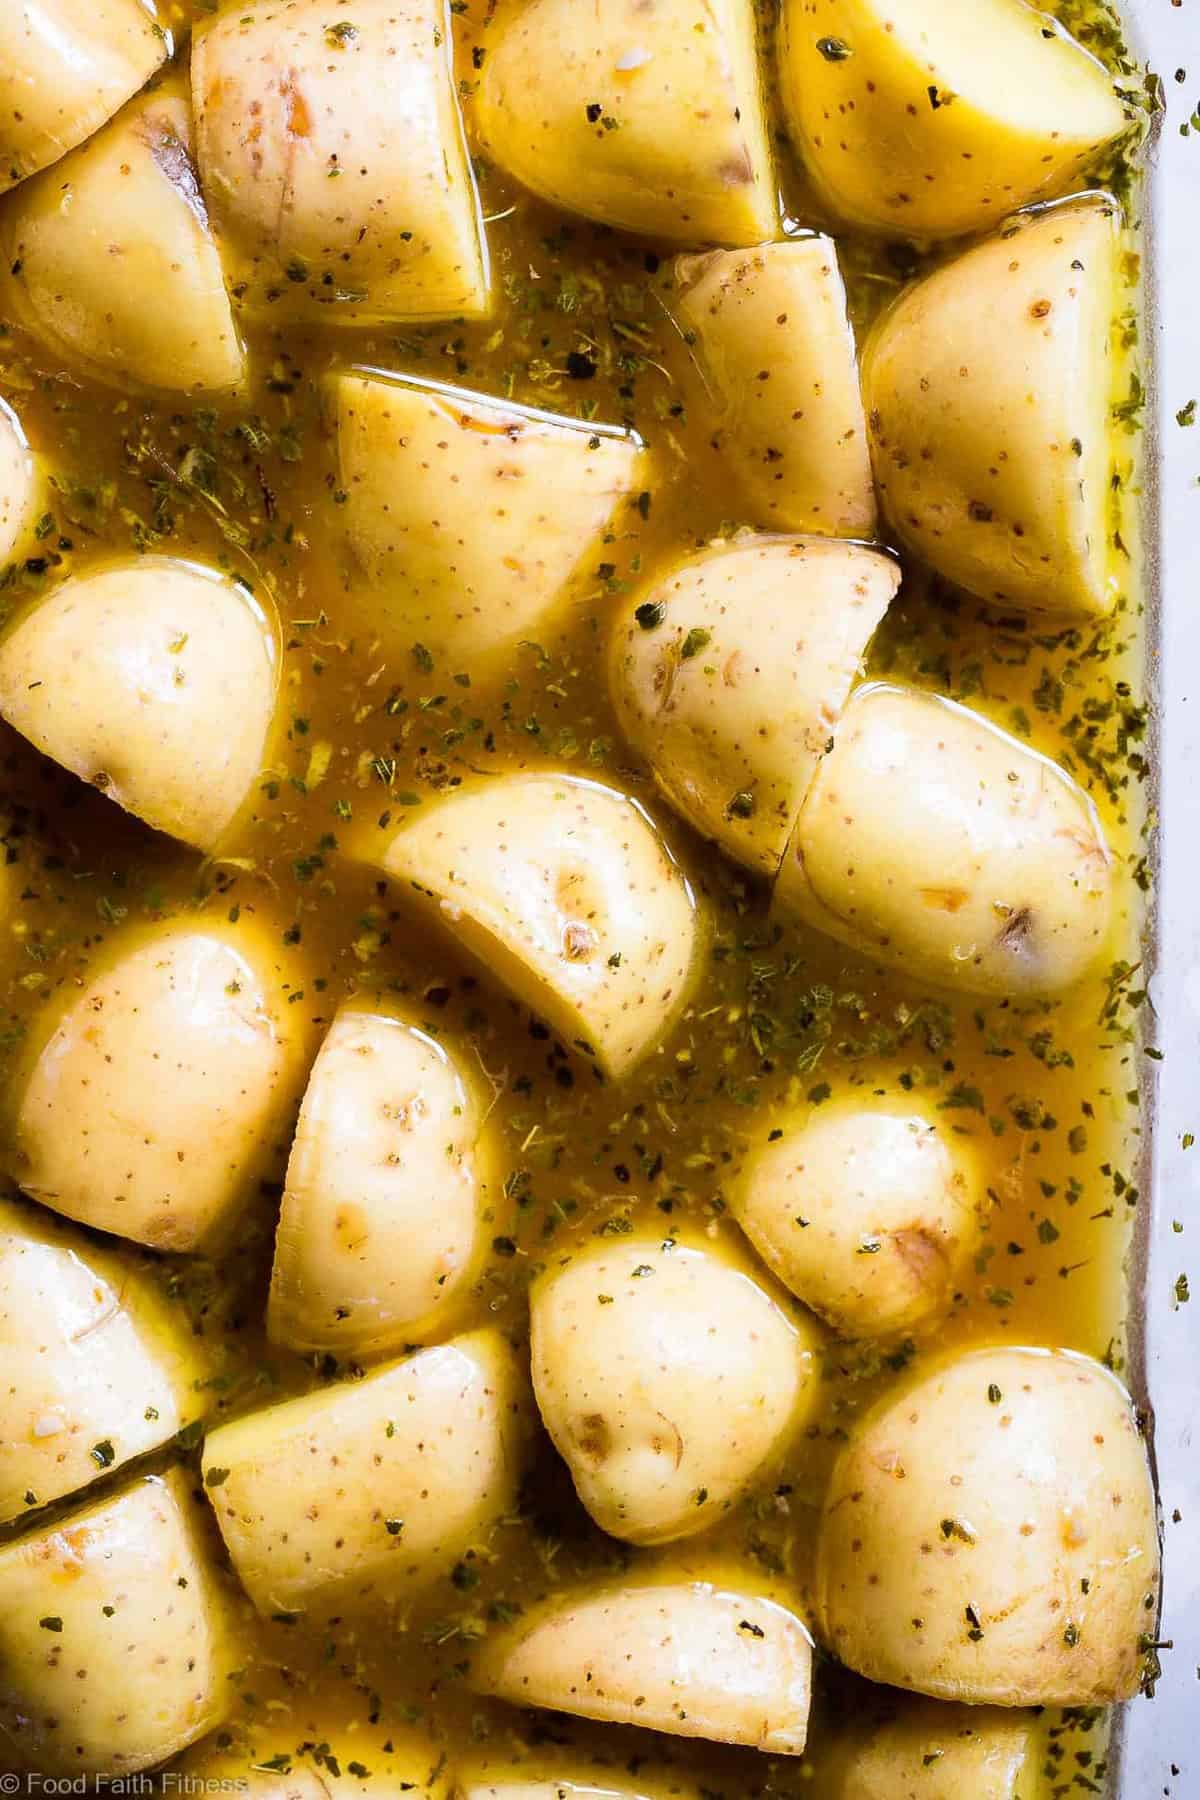 Oven Roasted Lemony Greek Potatoes - These are the BEST Oven Roasted Lemon Greek Potatoes! Tangy, zesty and so packed with flavor you will make them all the time! SO easy, whole30 complaint and vegan/ gluten free too! | #Foodfaithfitness | #Glutenfree #Vegan #Whole30 #Healthy #Dairyfree